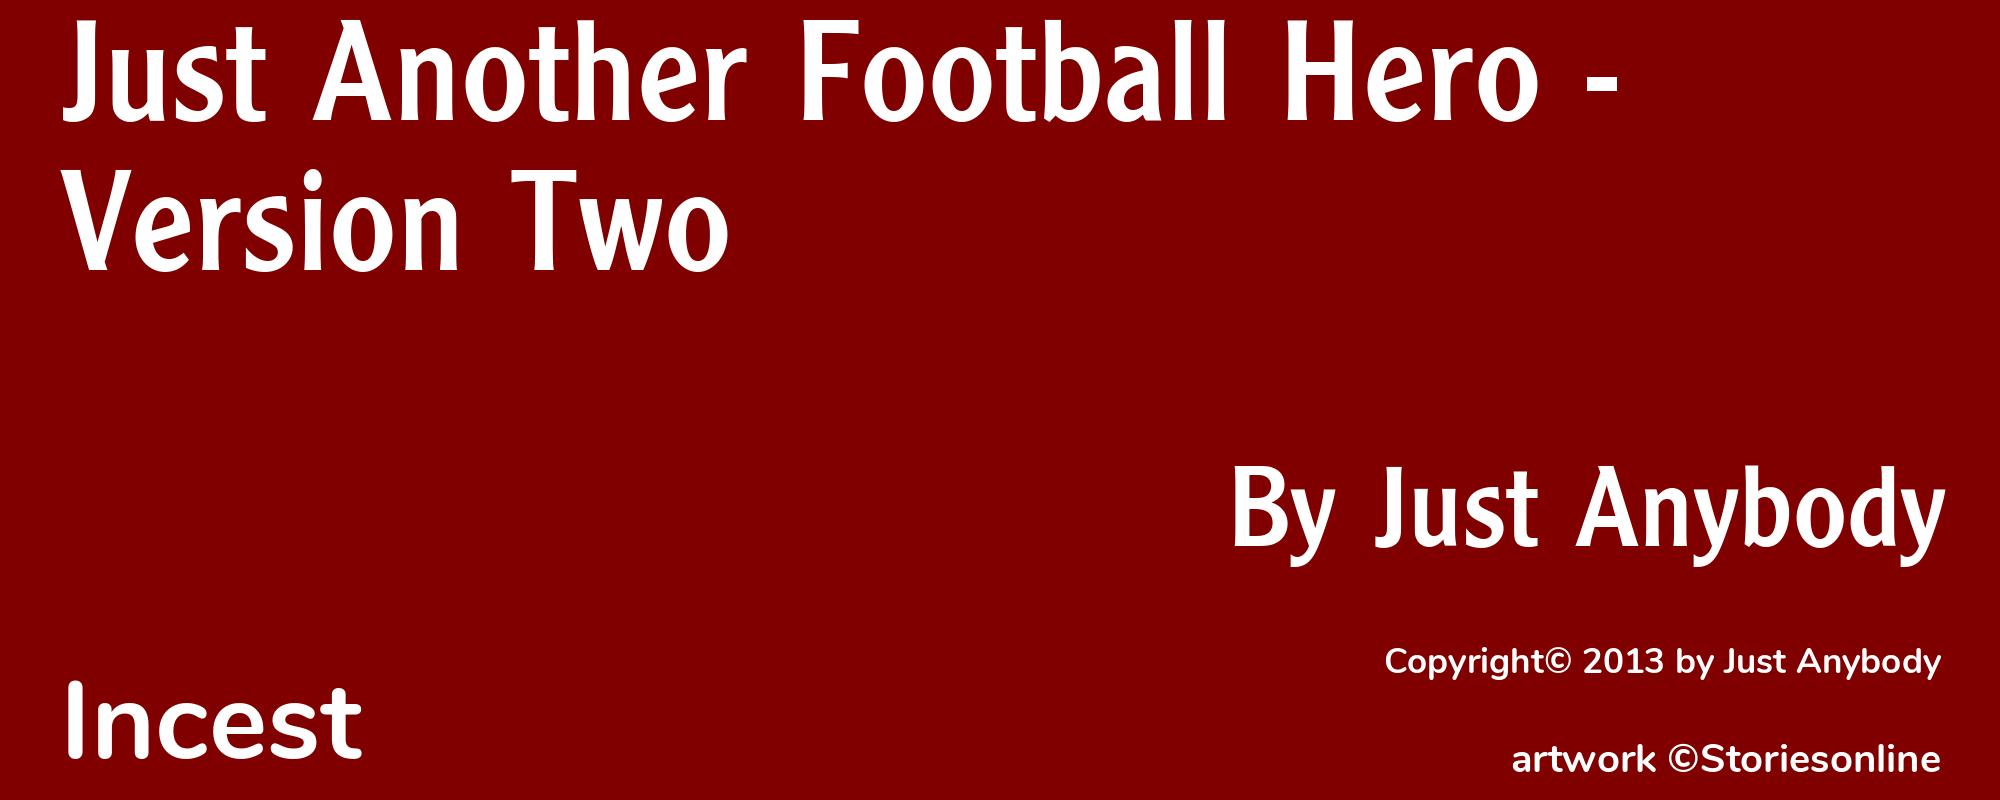 Just Another Football Hero - Version Two - Cover